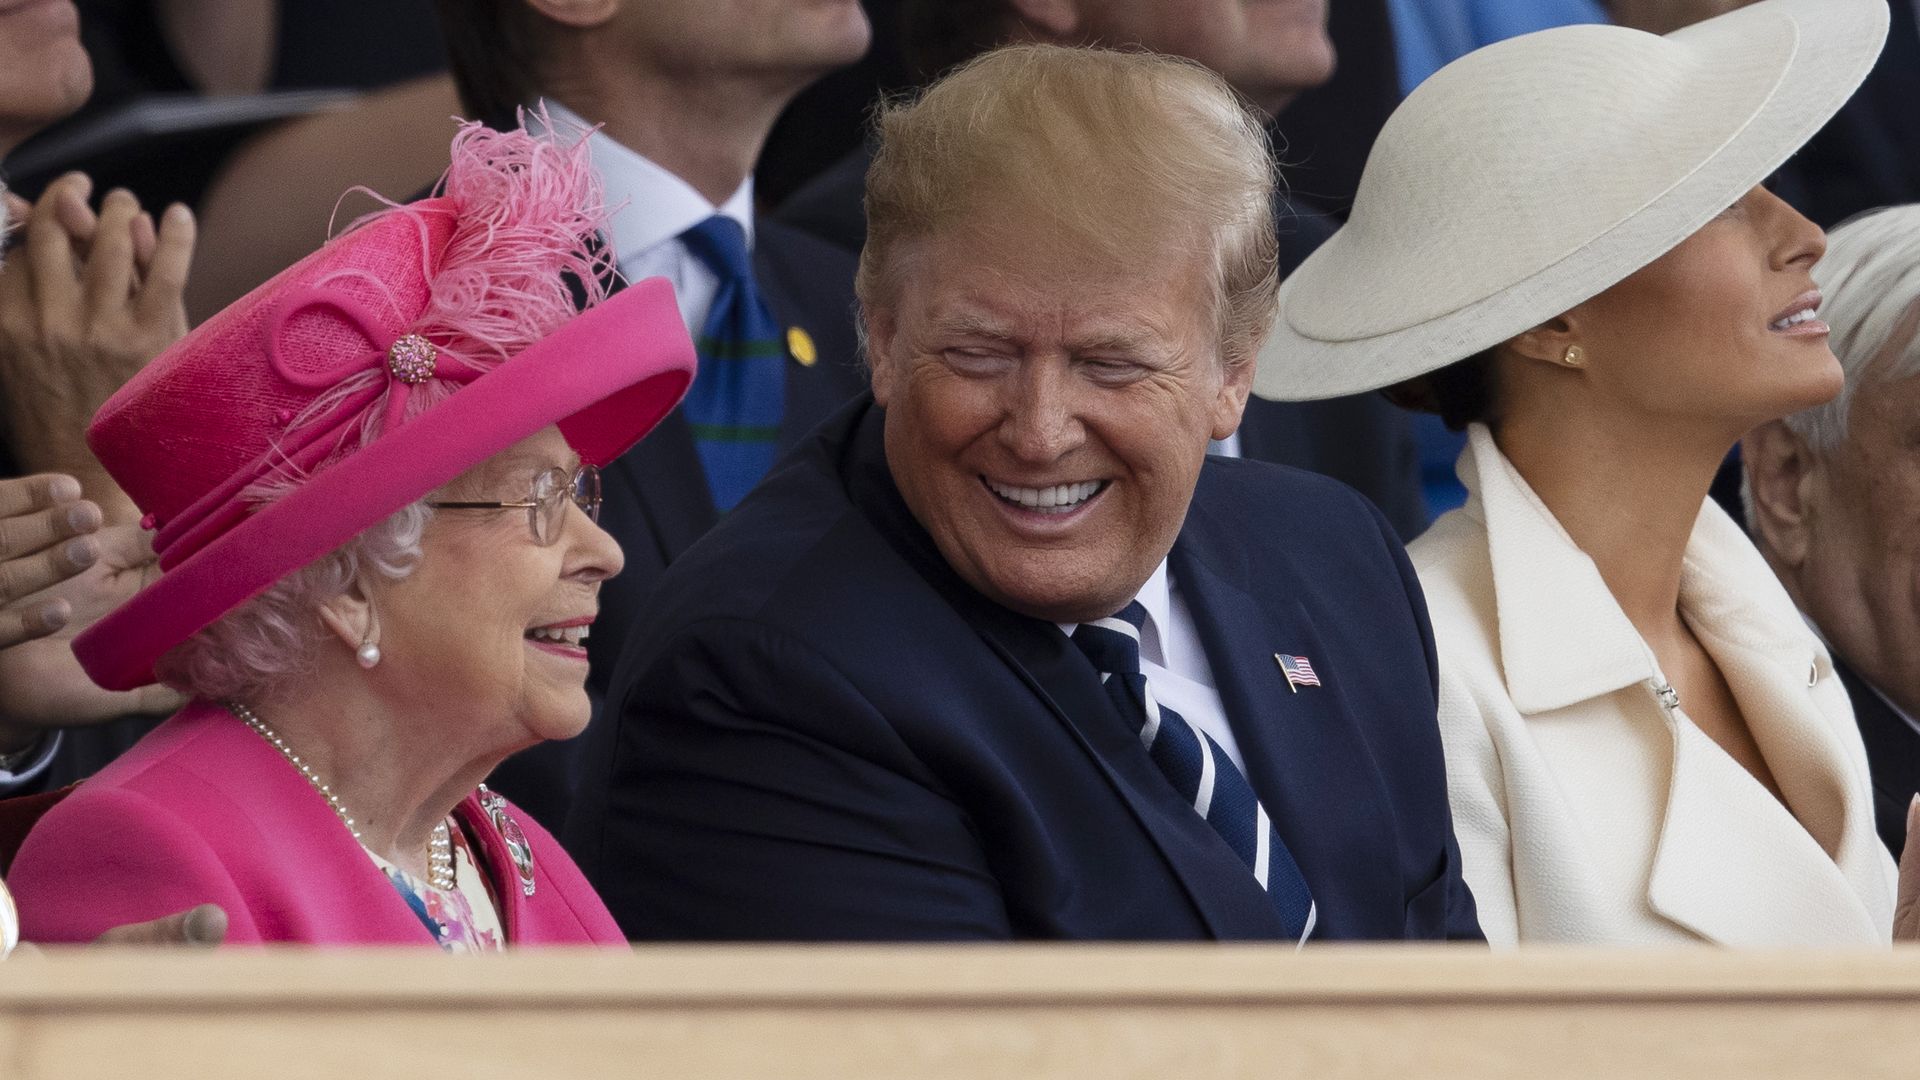 President Trump with the Queen of England